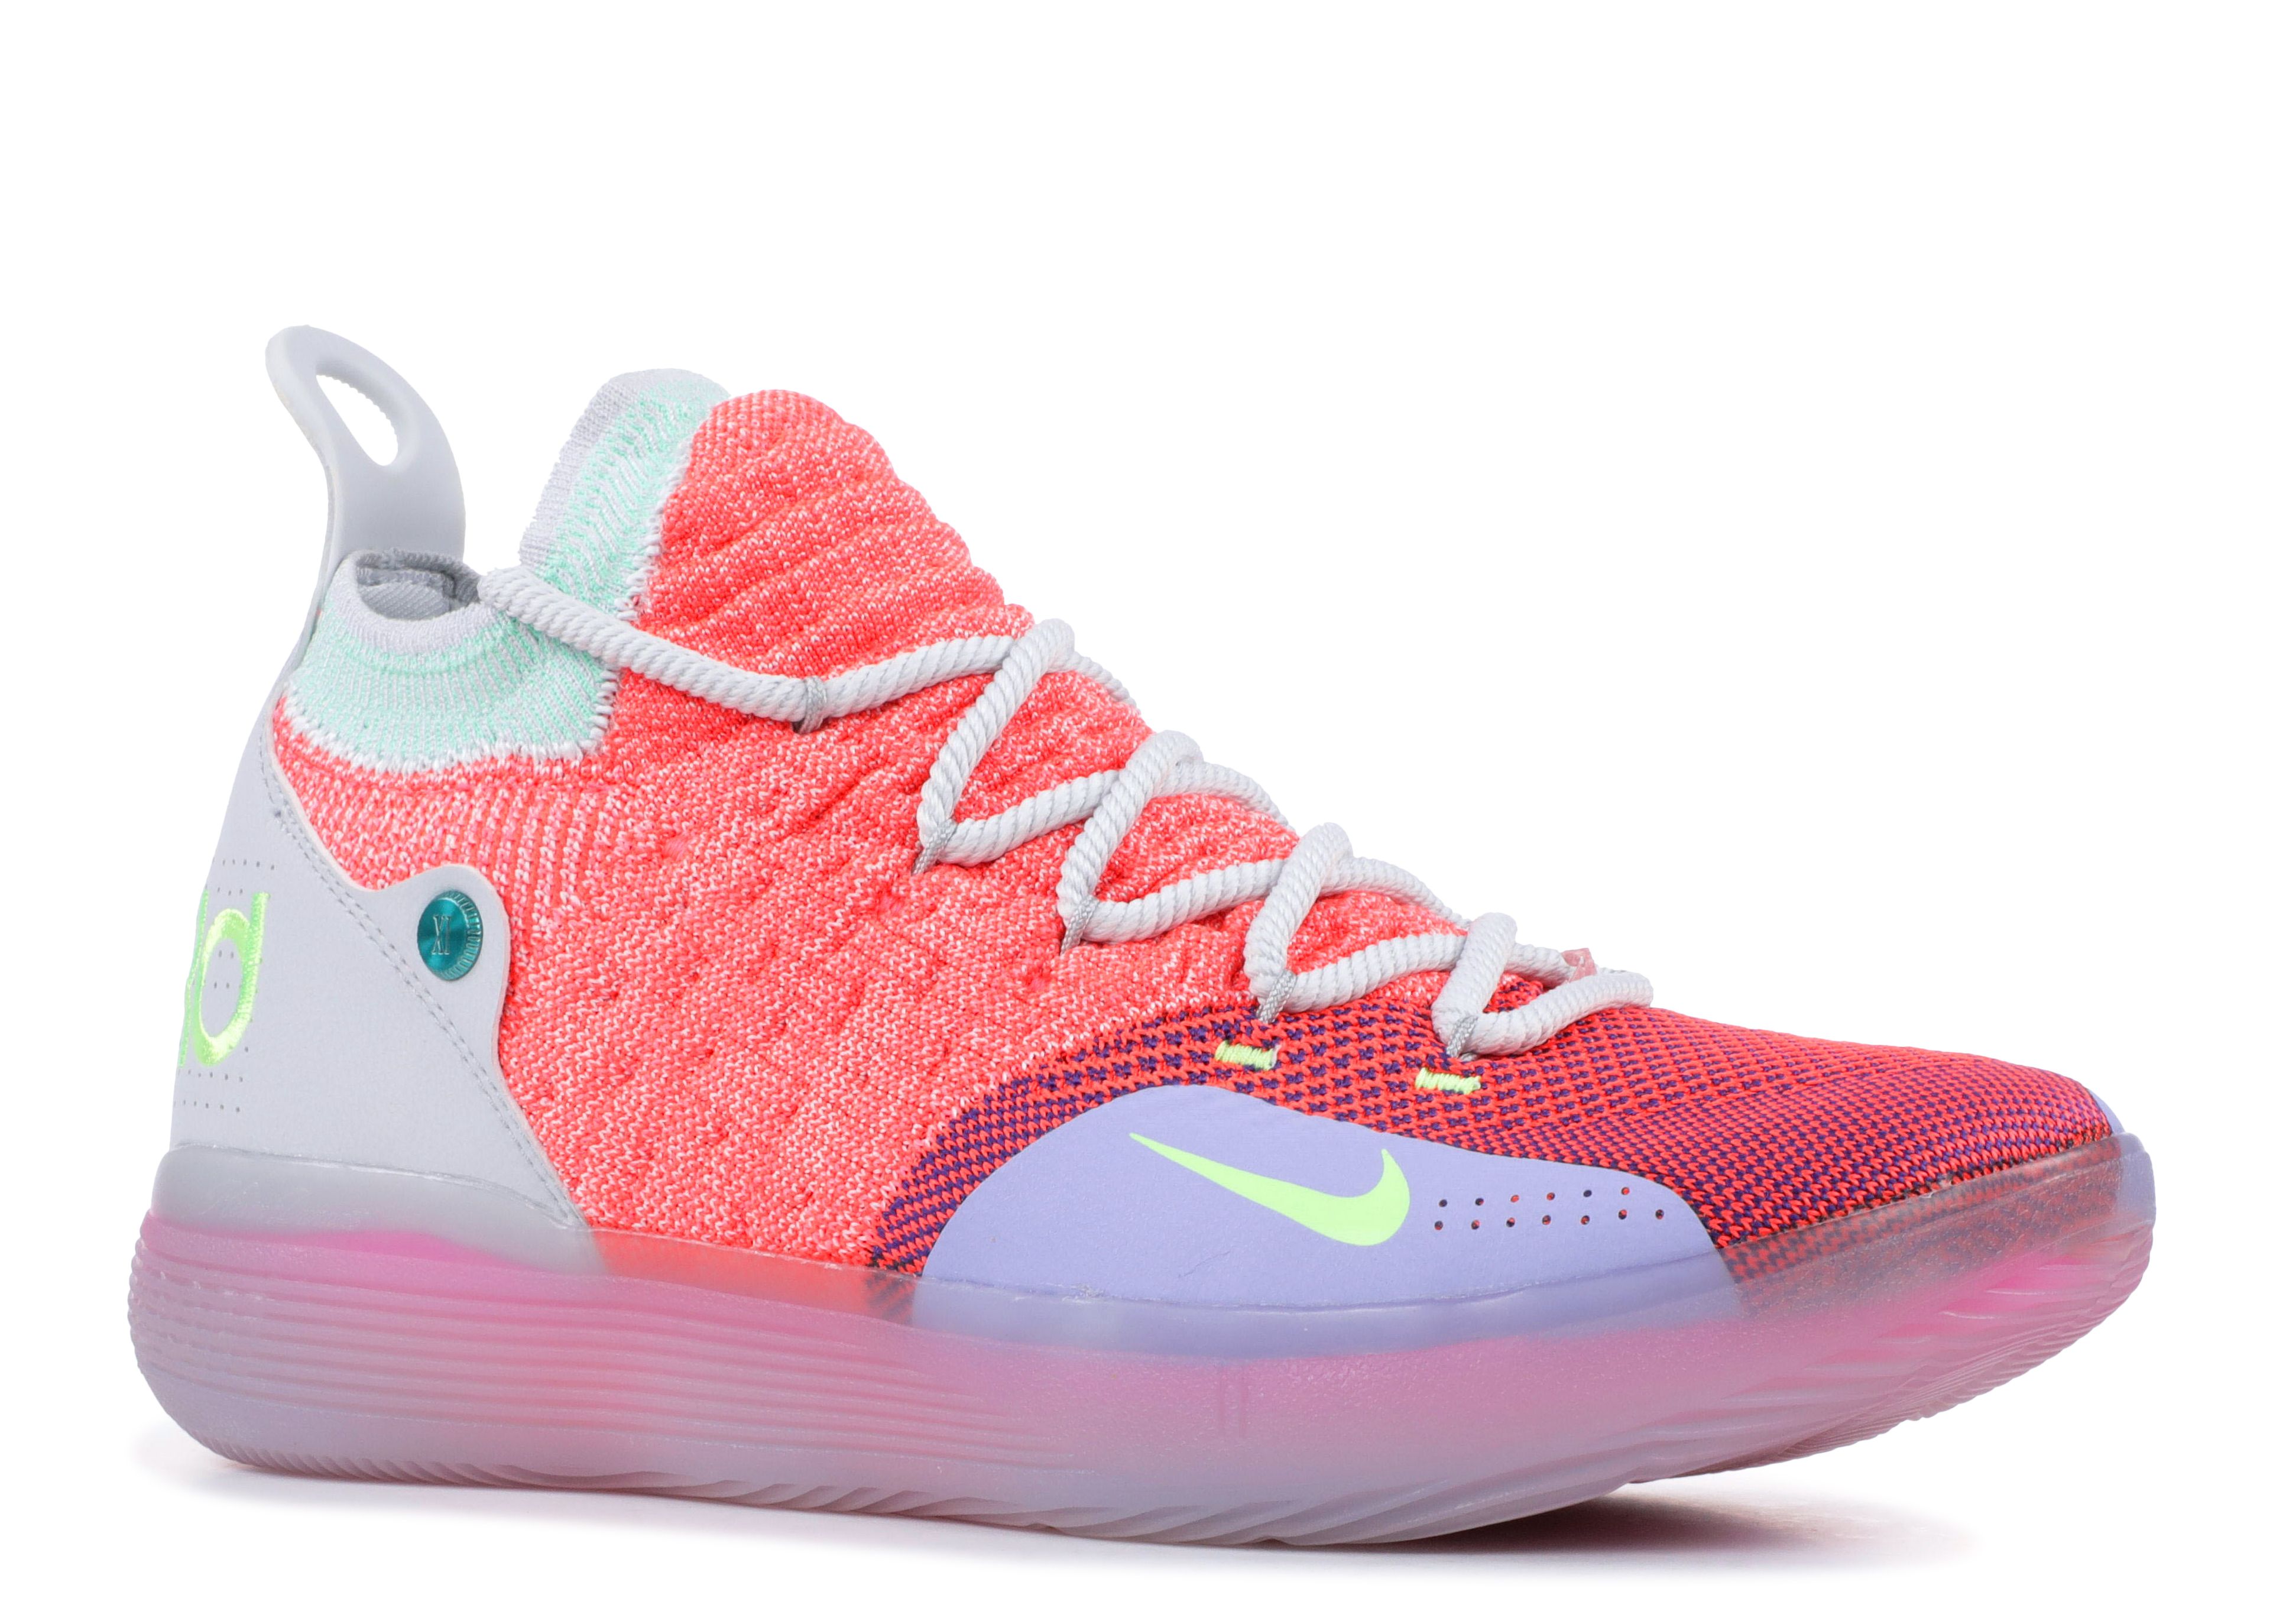 kd 11 pink shoes